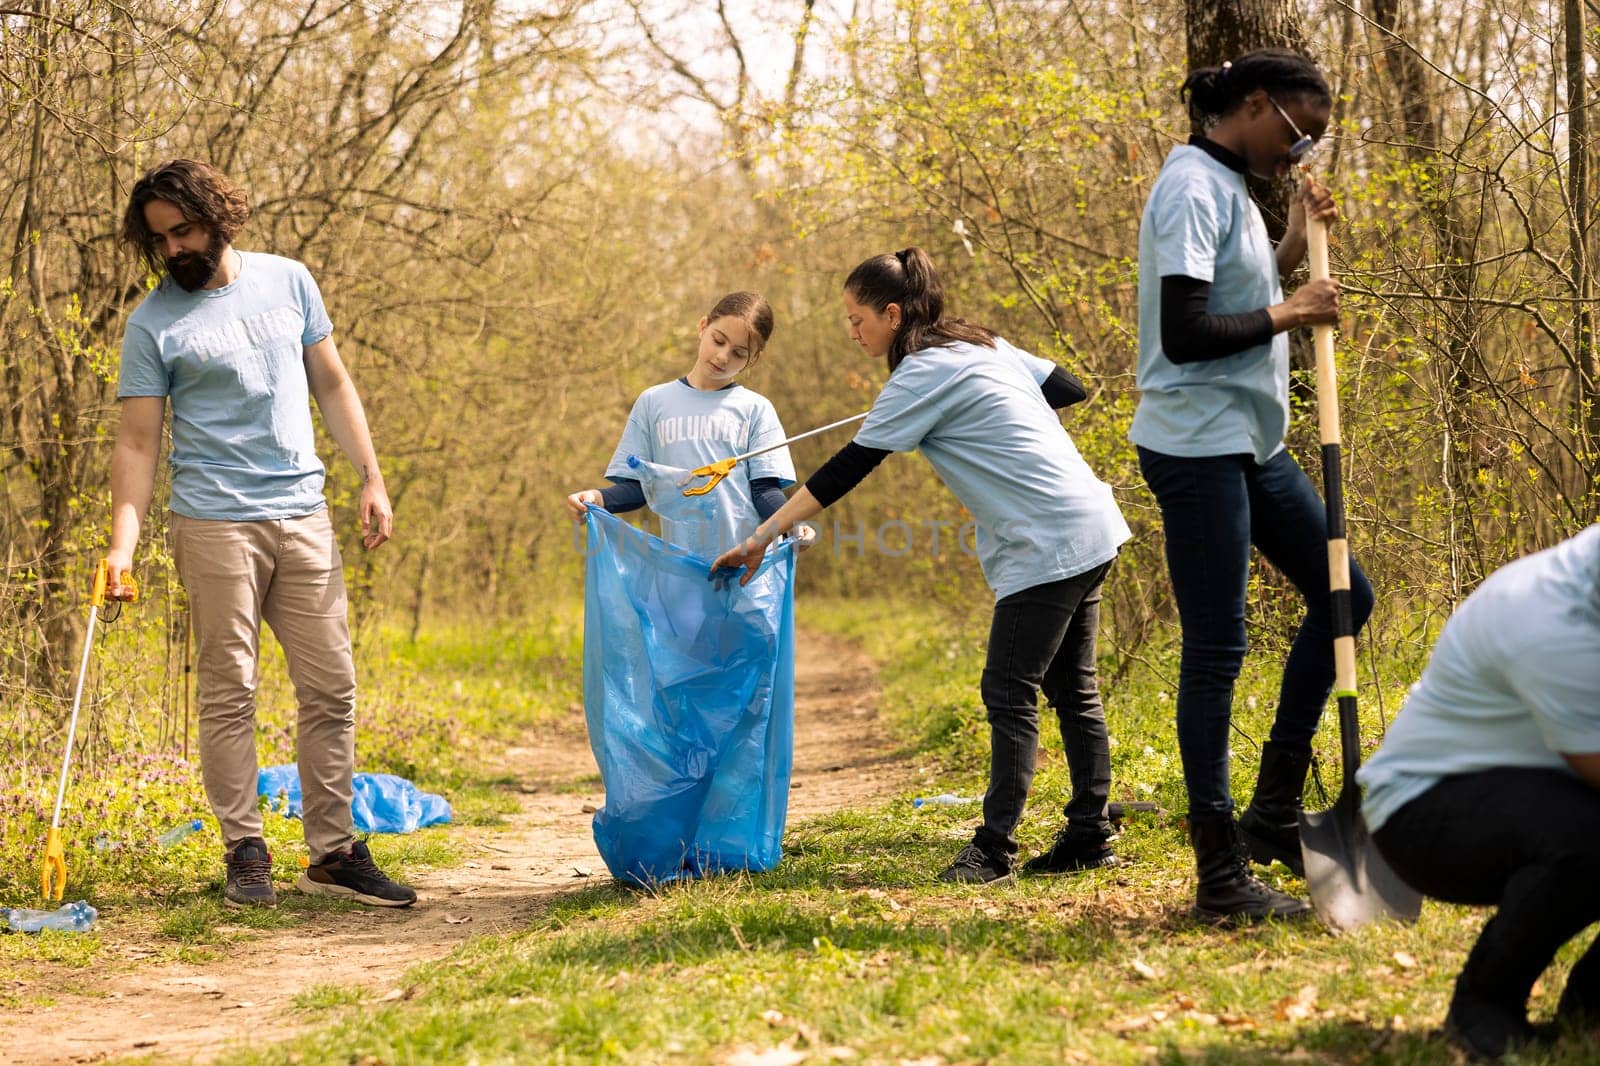 Group of diverse activists collecting trash from the forest and recycling in a garbage disposal bag, cleanup responsibility. Ecology volunteers picking up junk and plastic waste.